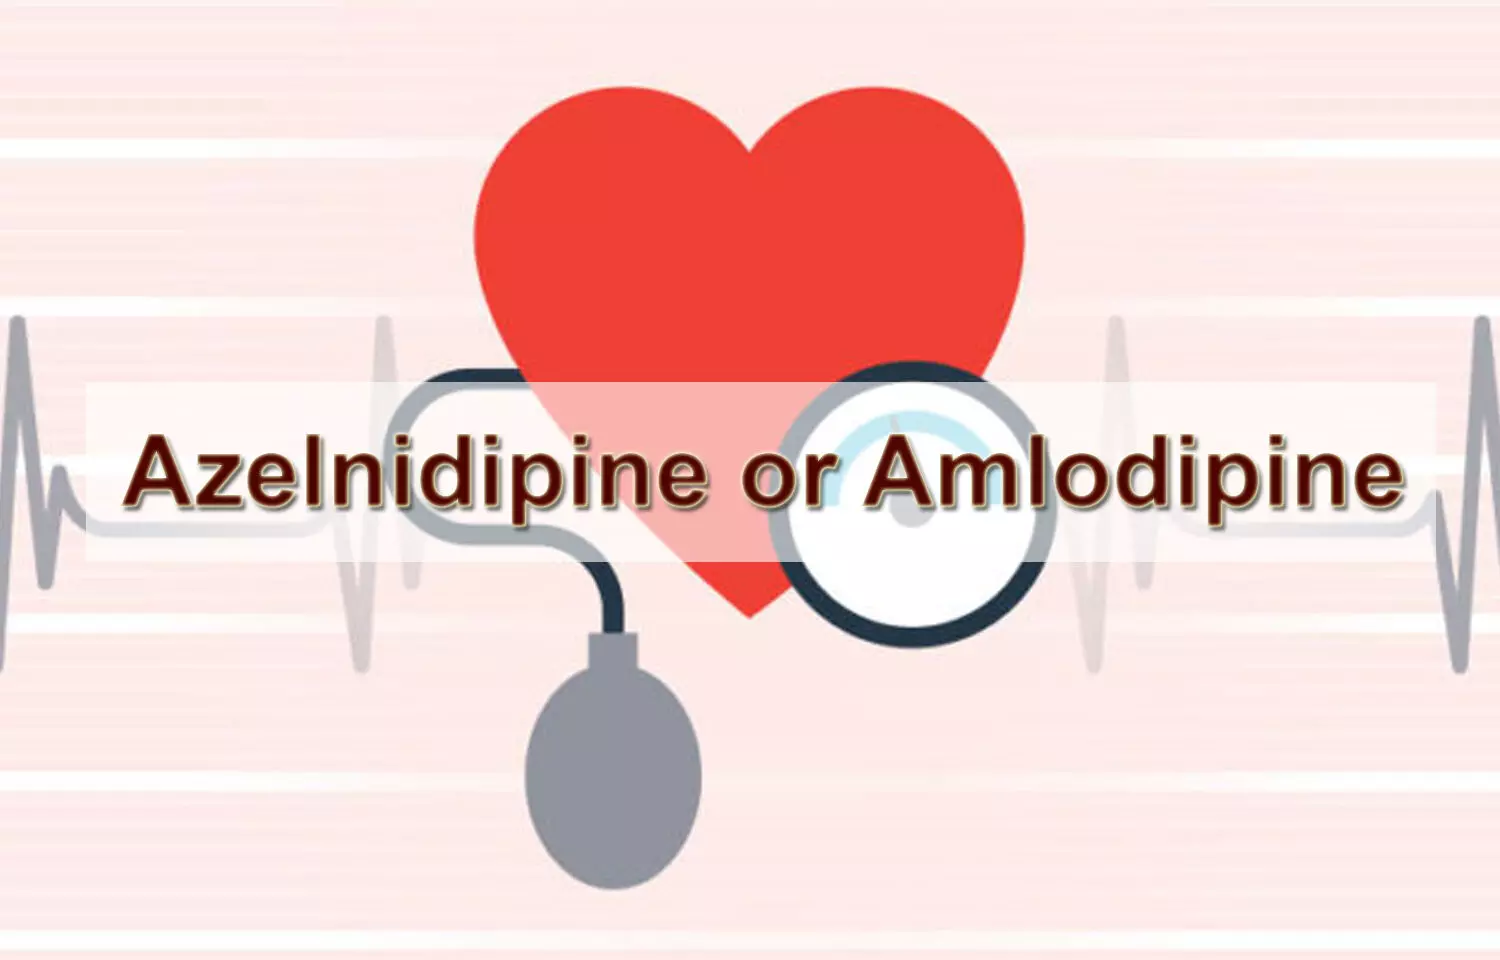 Azelnidipine versus Amlodipine in hypertensive diabetics with albuminuria: Review